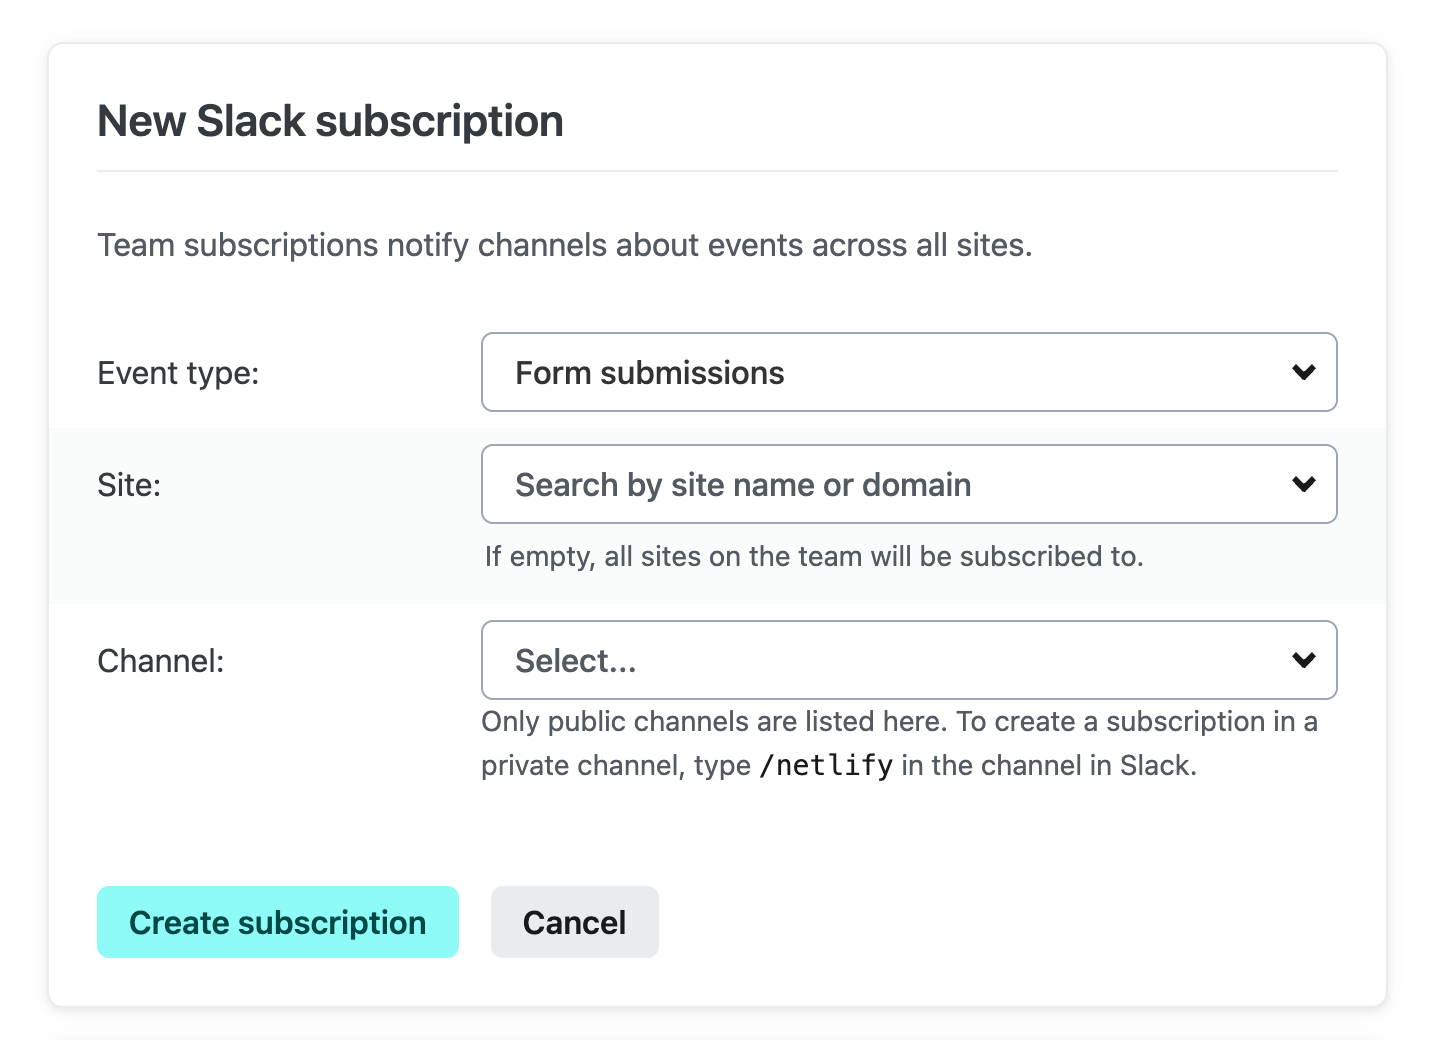 The Team-level subscription form with the form submissions event type selected`